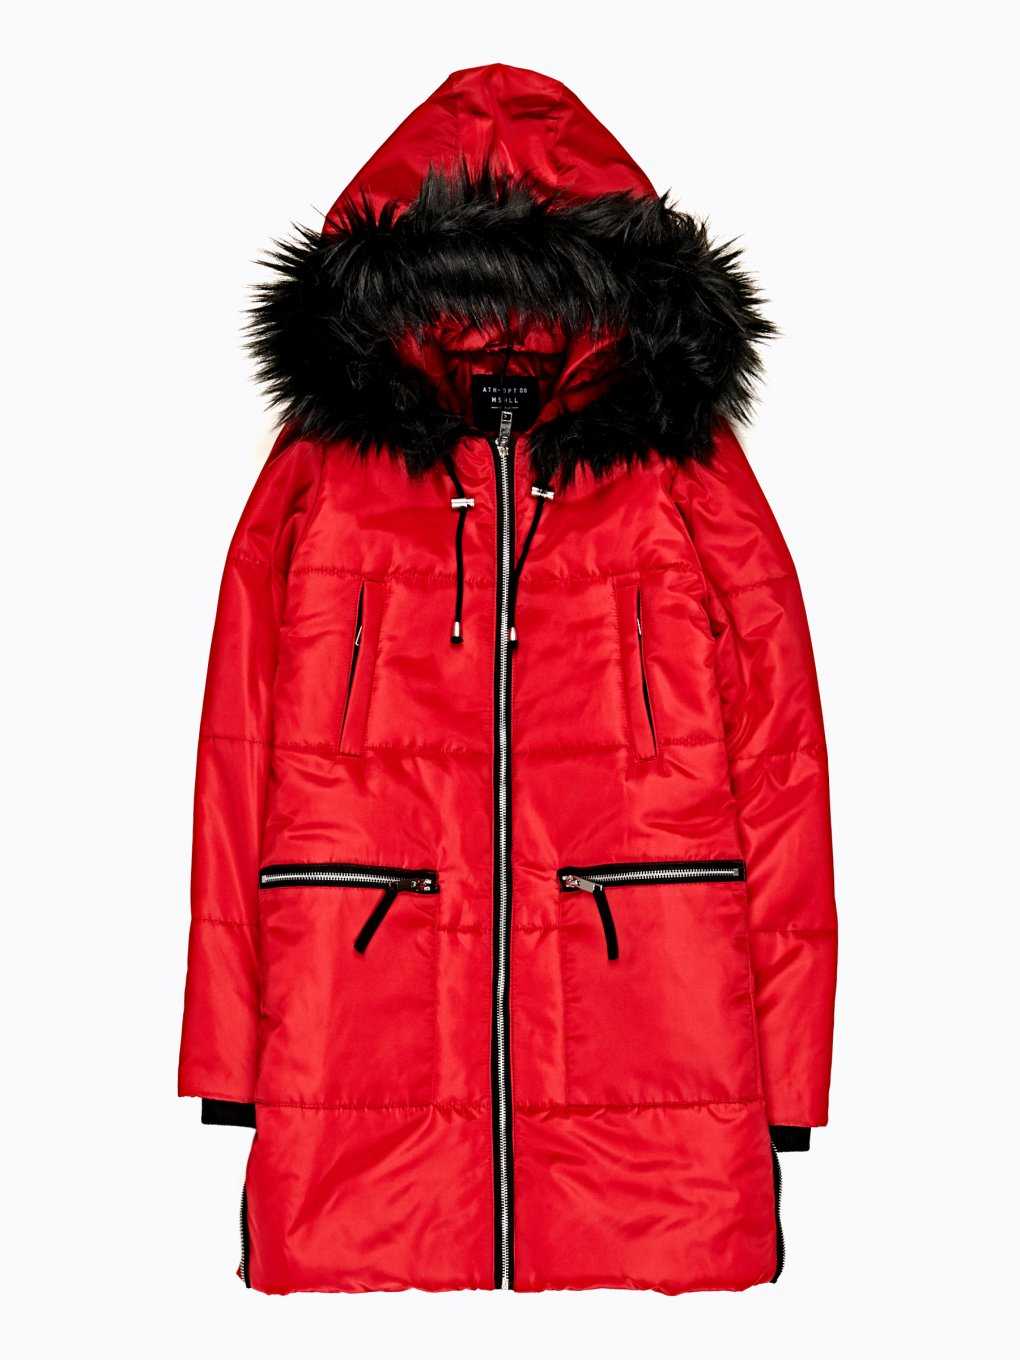 OVERSIZED PADDED JACKET WITH ZIPPERS